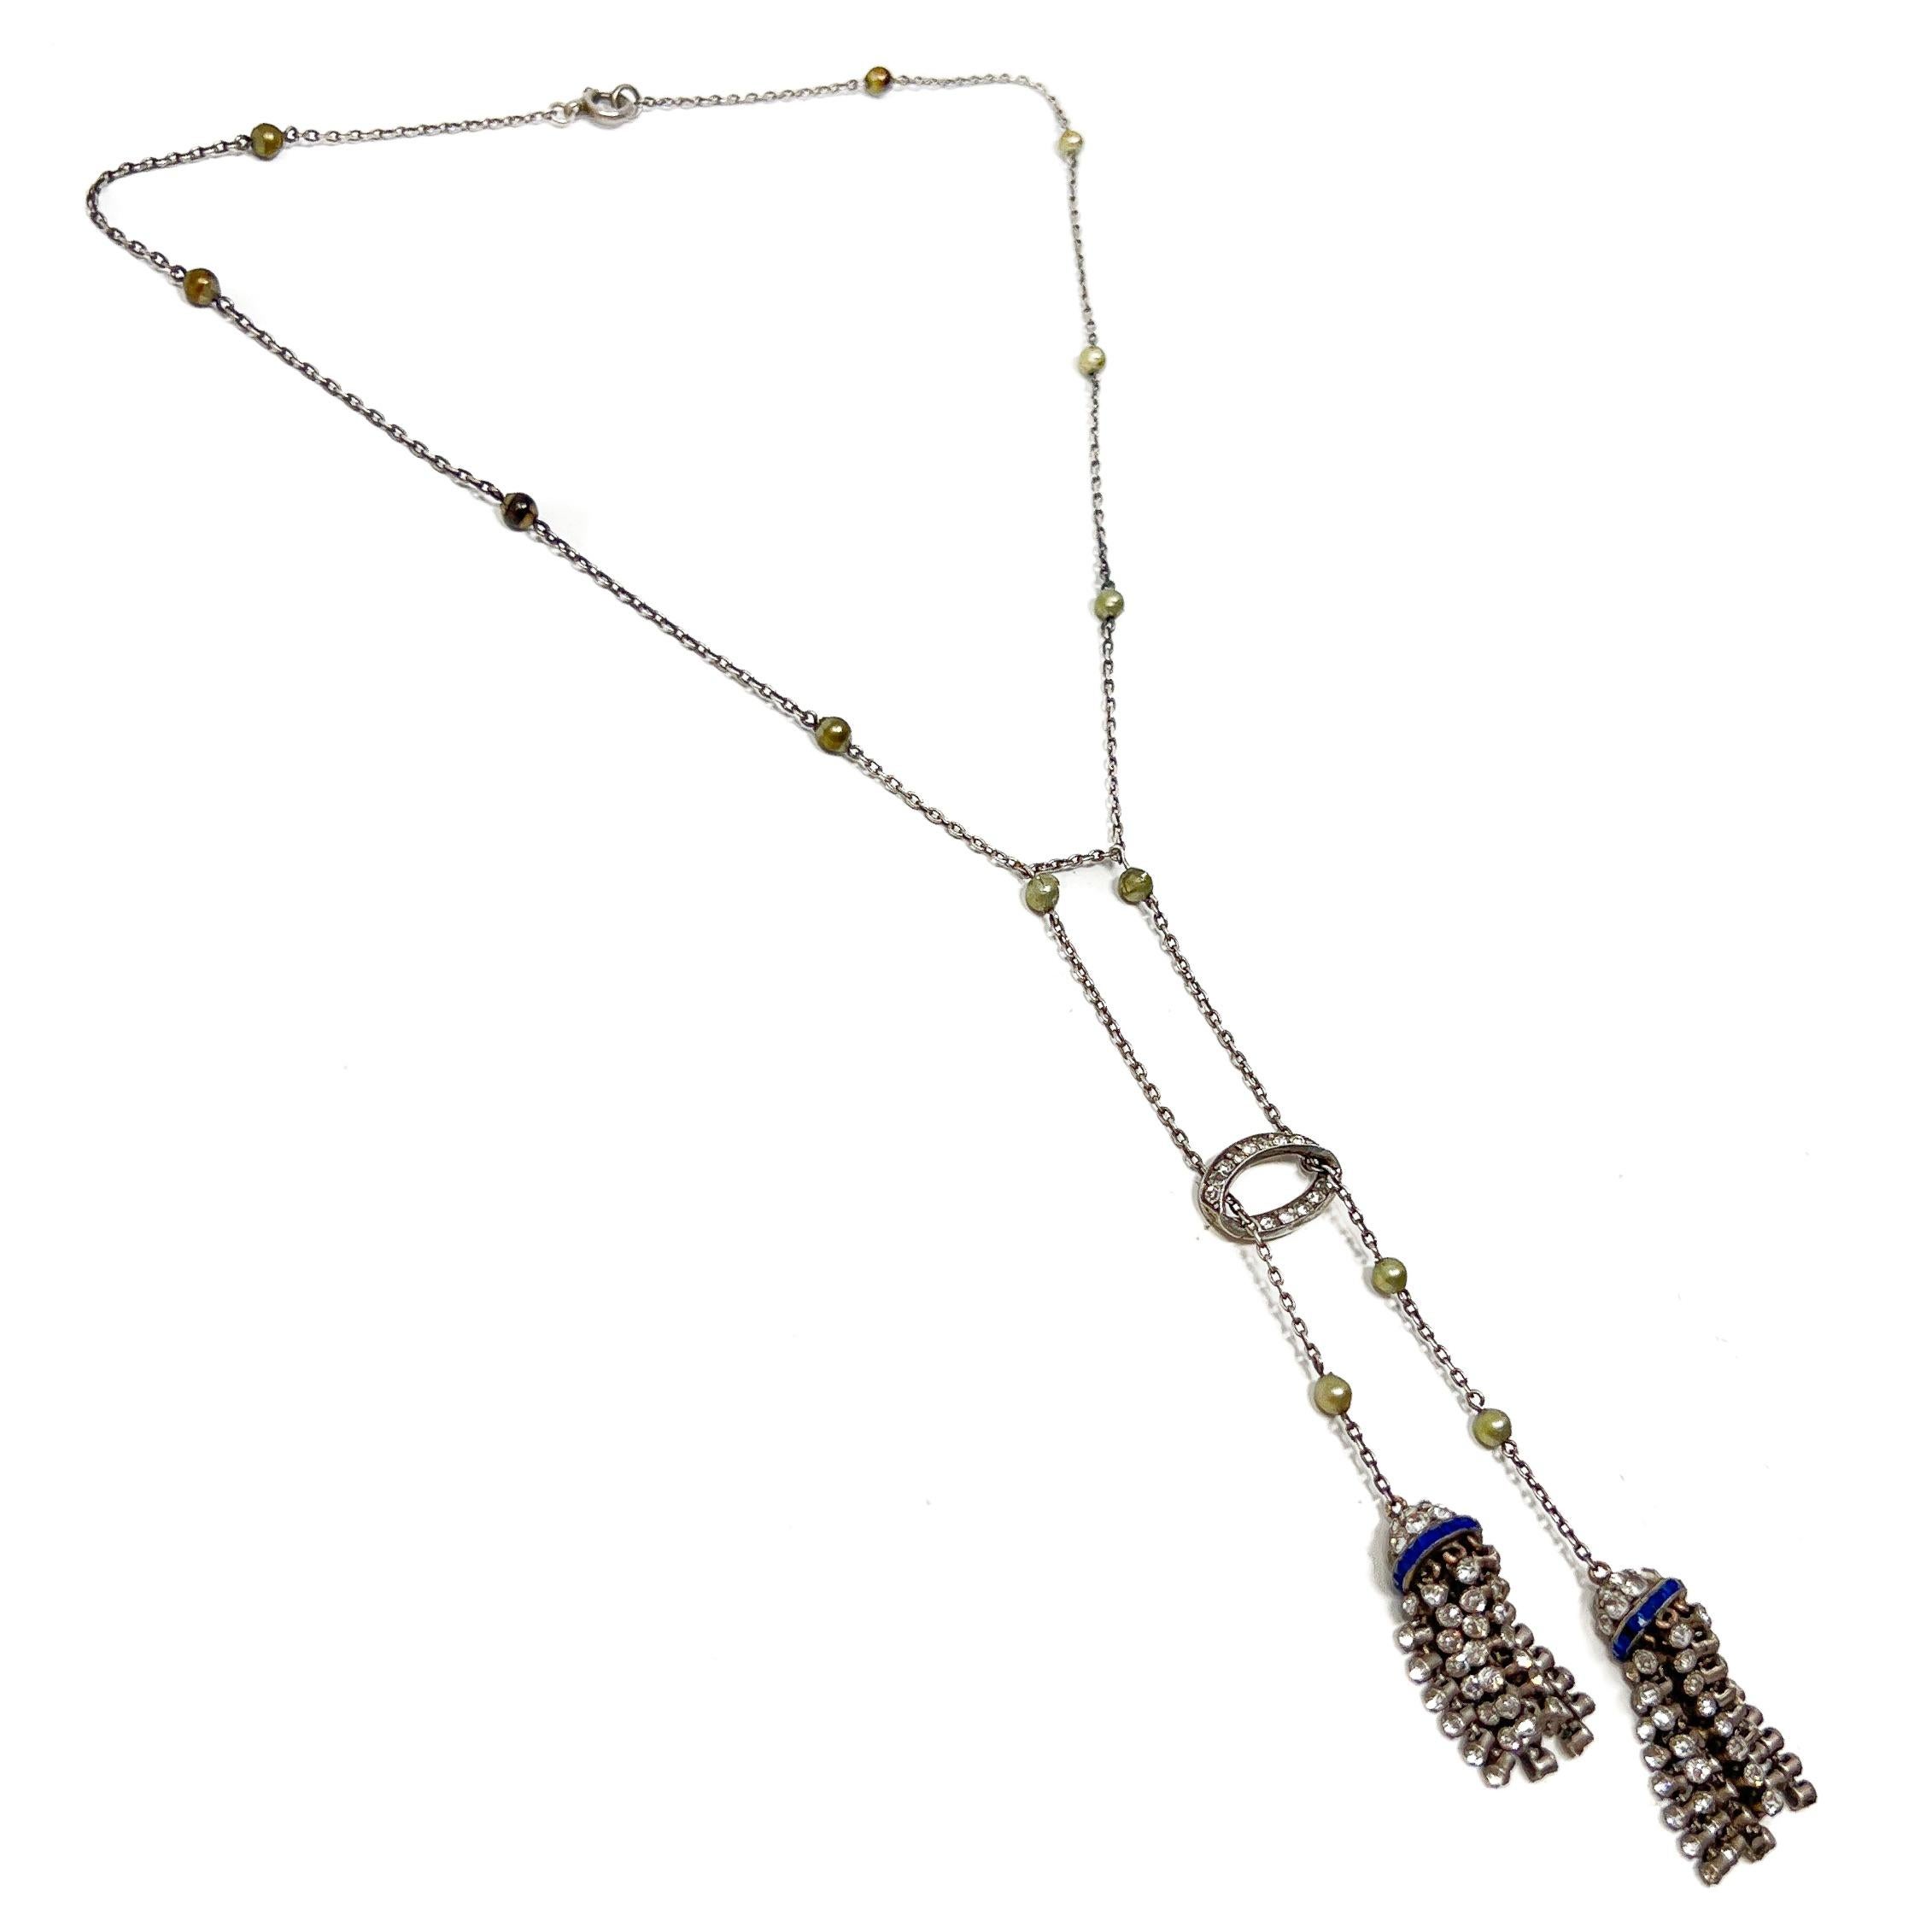 Women's 1920s Art Deco Silver, Paste and Faux Pearl Vintage Tassel Necklace For Sale